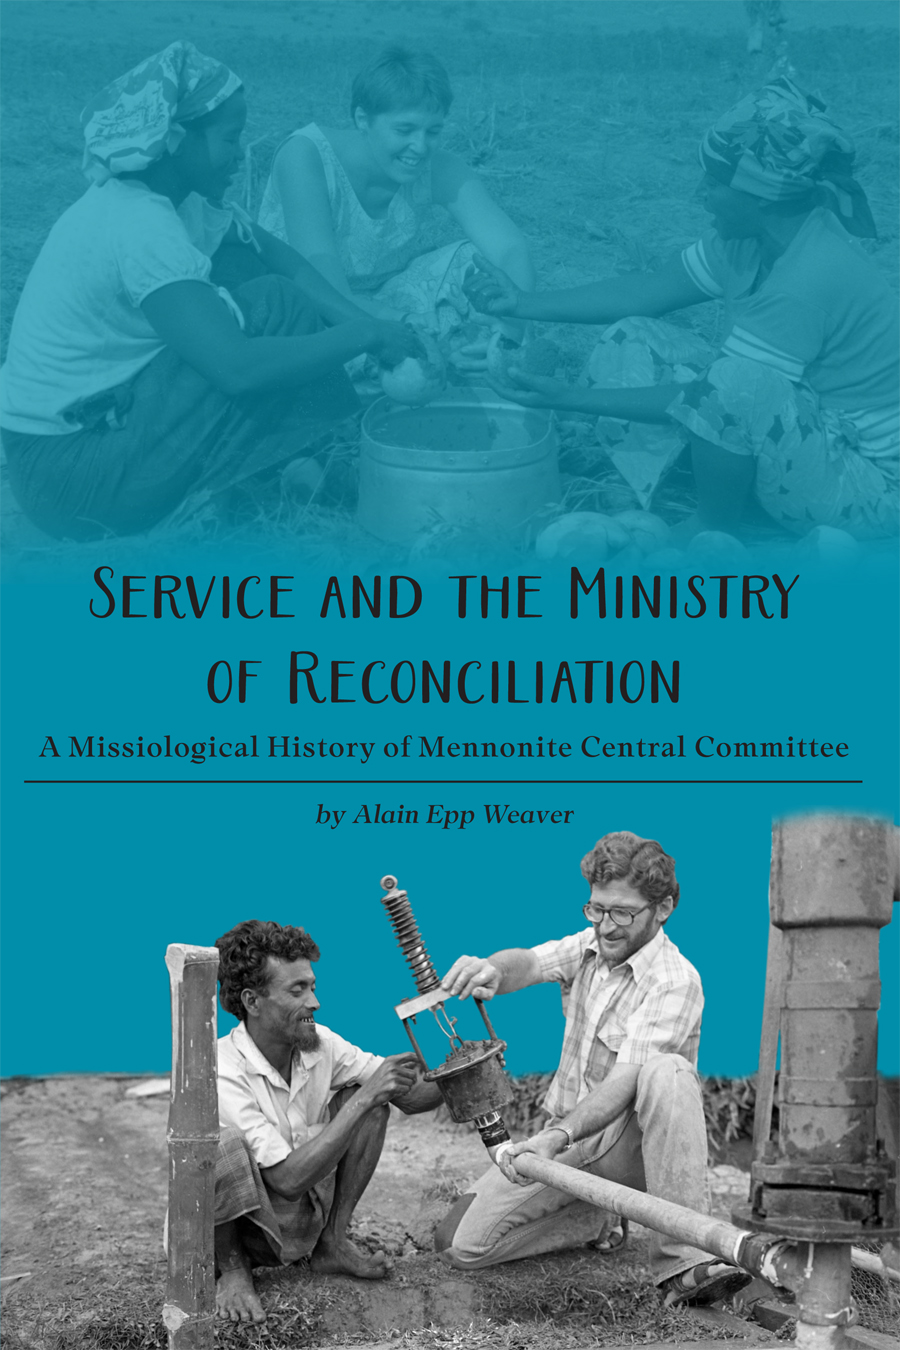 Service and the Ministry: A Missiological History of Mennonite Central Committee